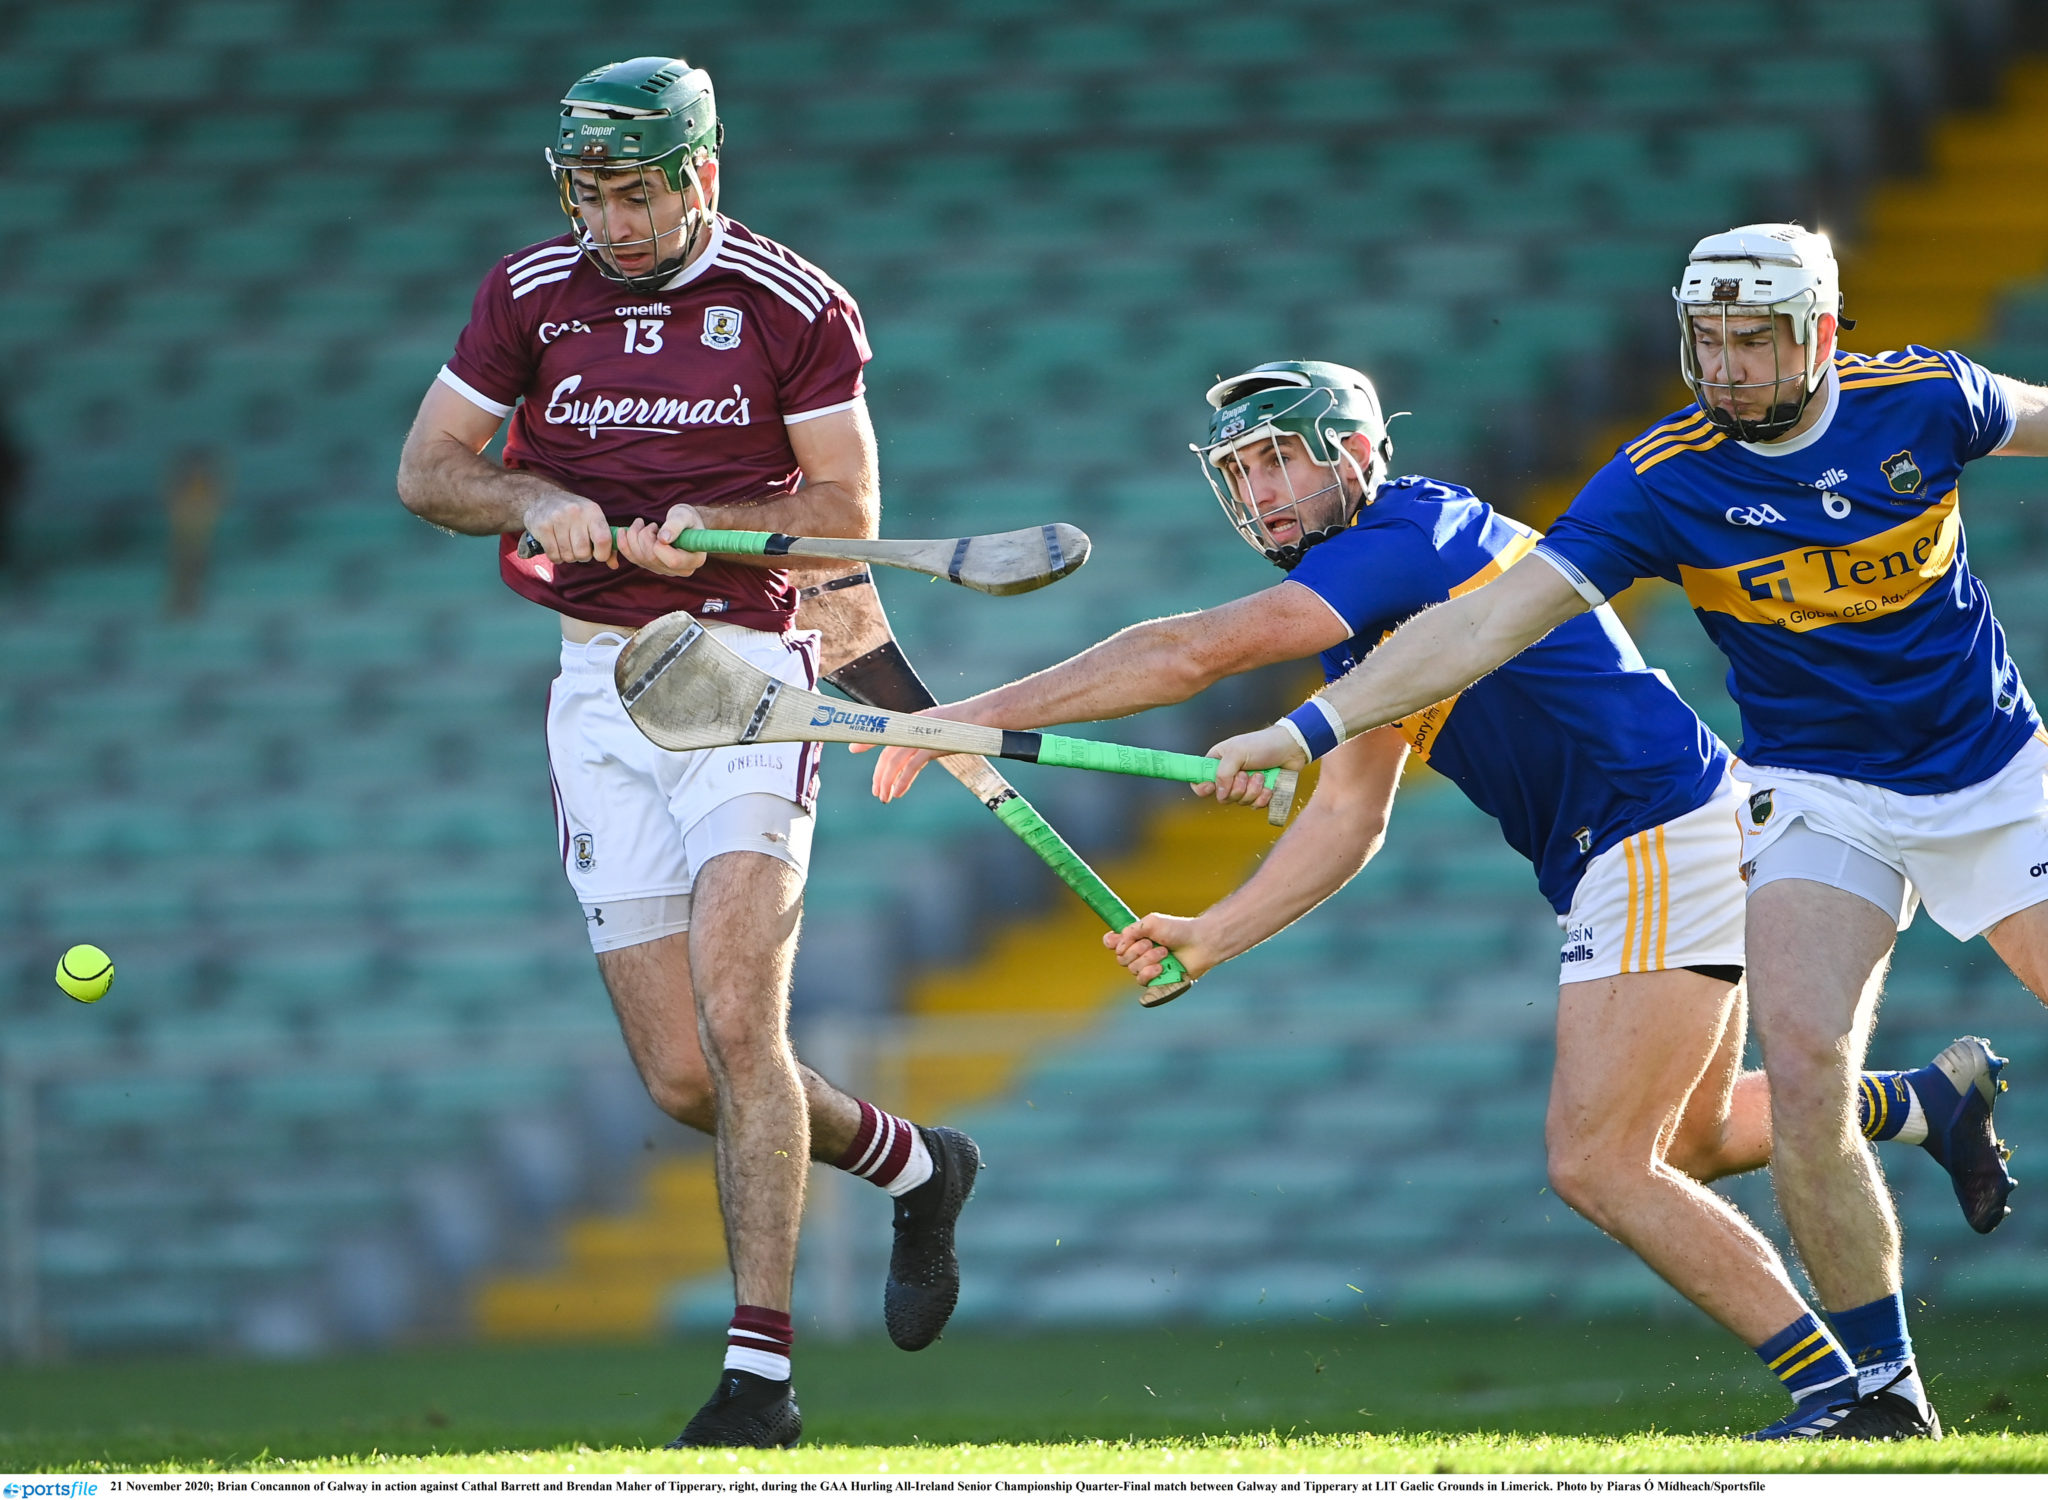 Brian Concannon and Cathal Barrett clash for a ball during the All-Ireland hurling championship